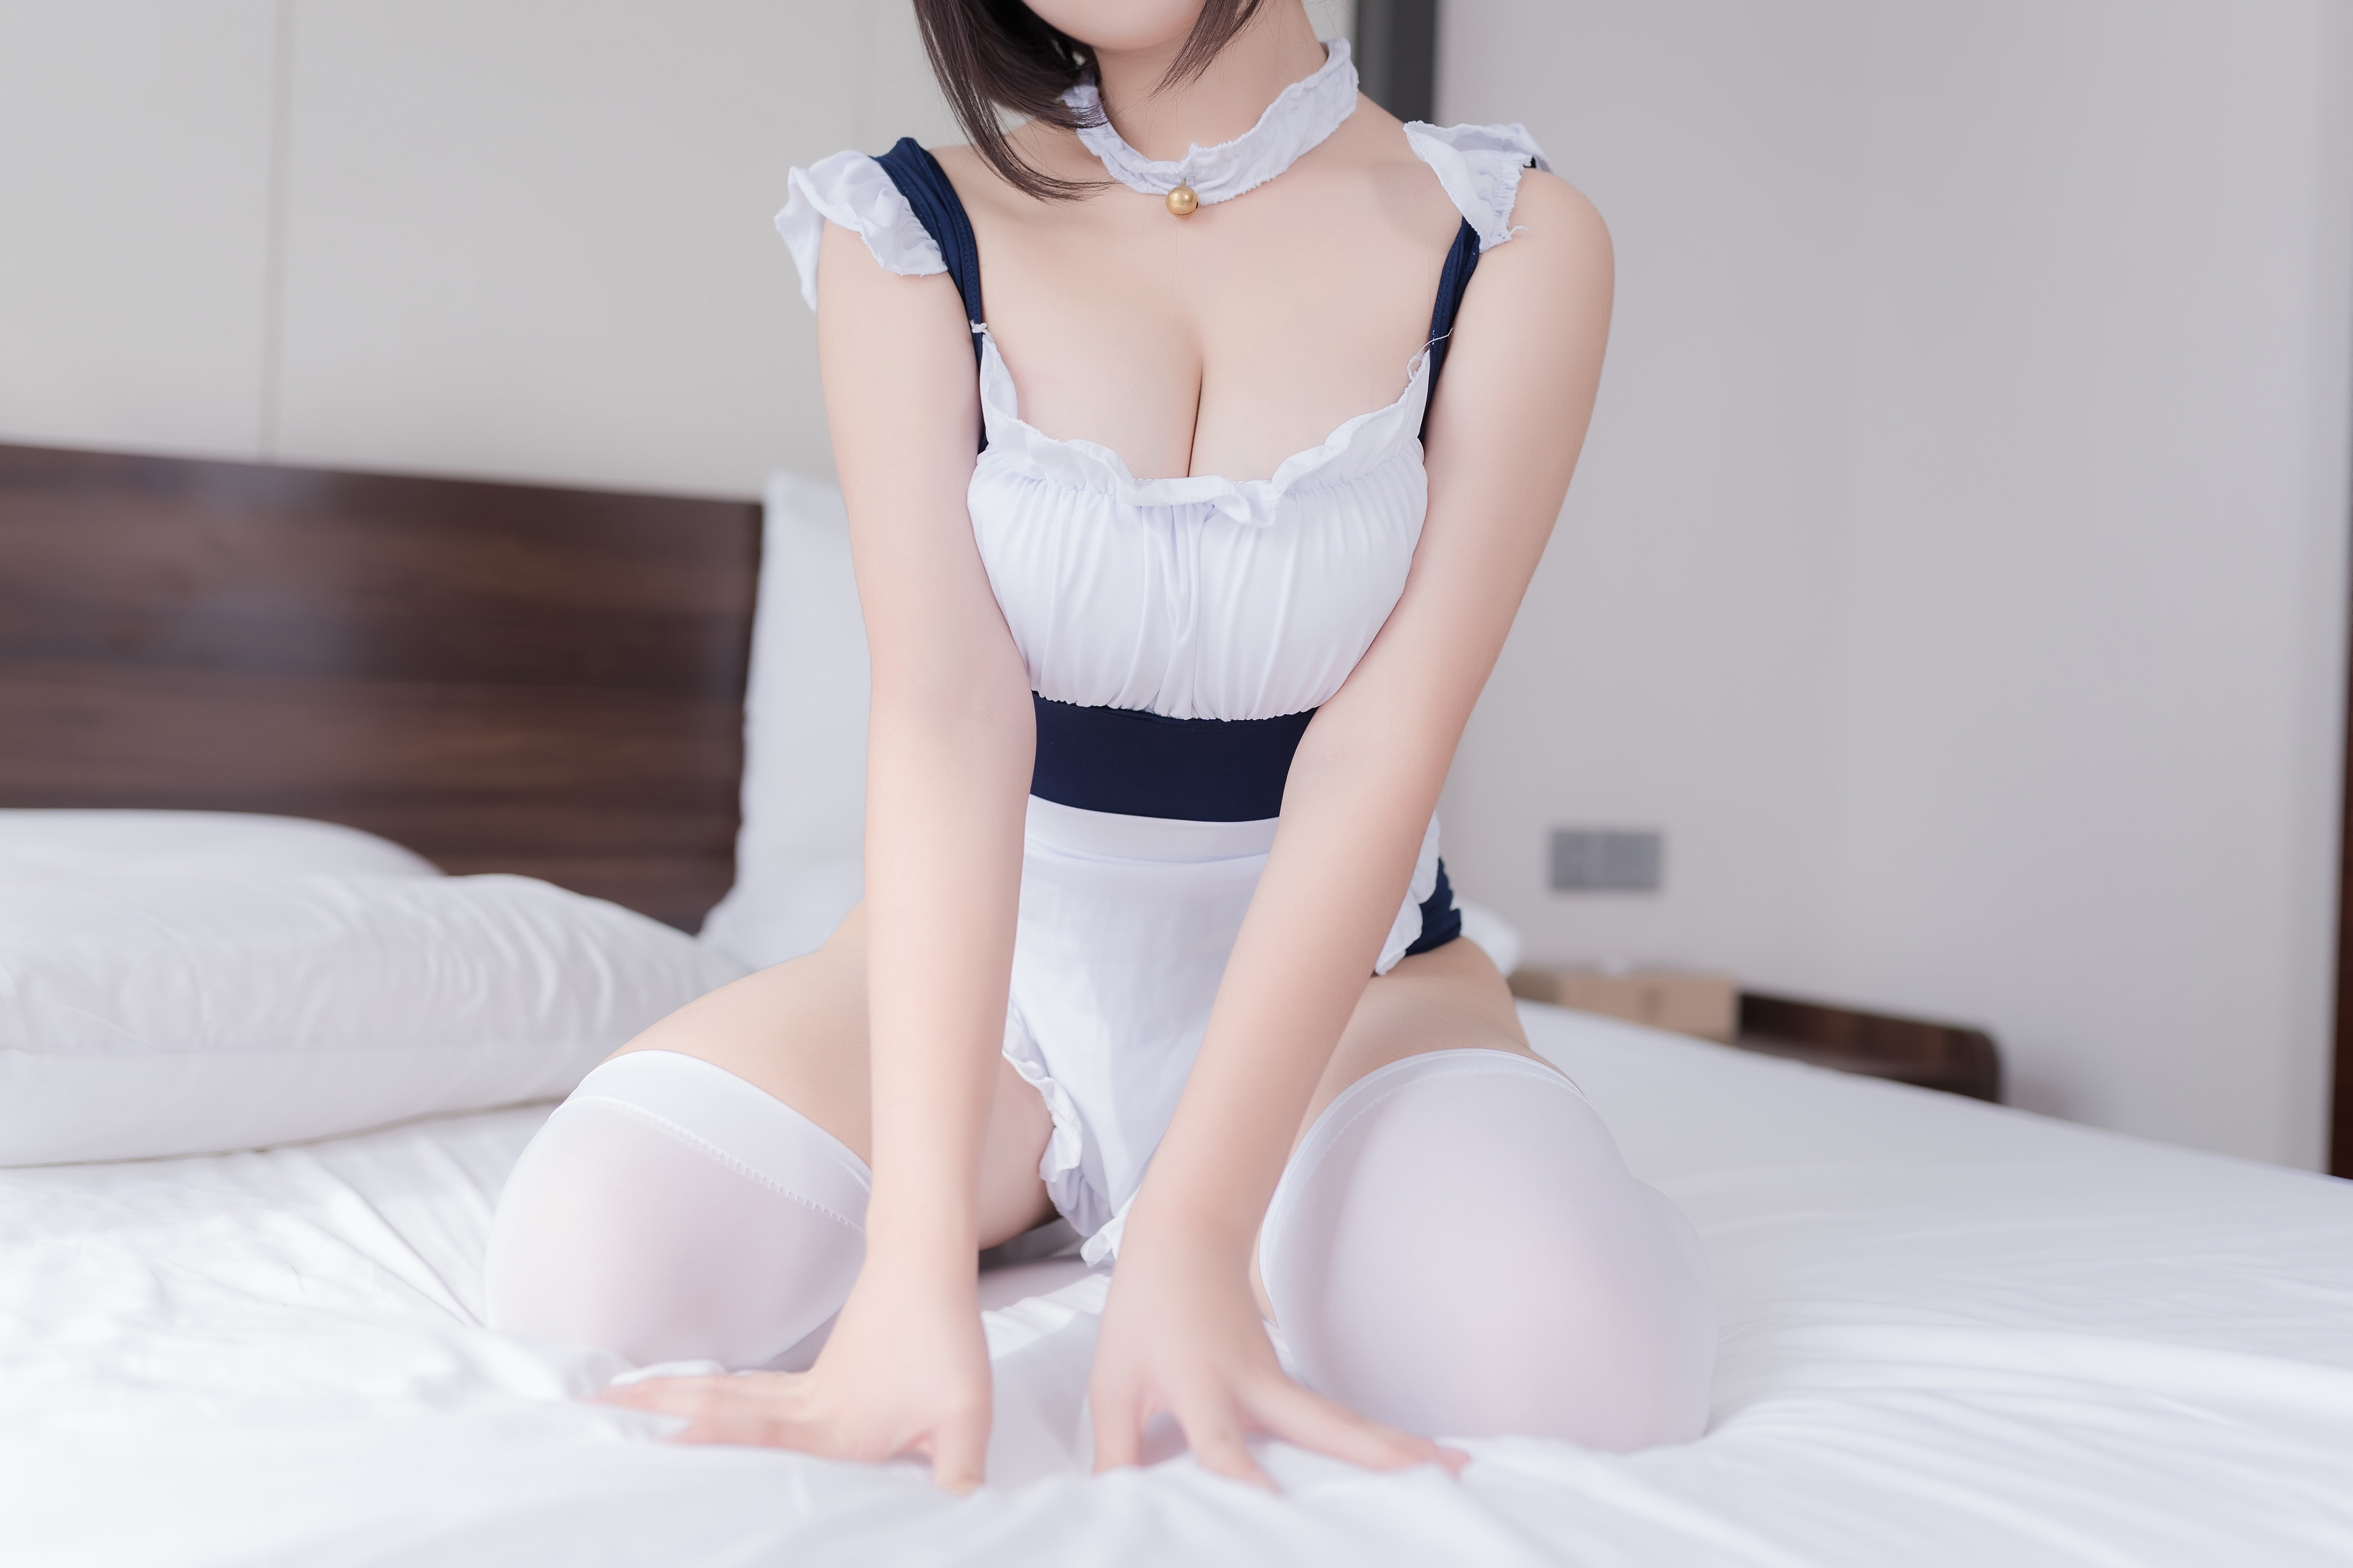 People 3860x2573 Mizhimaoqiu women model cosplay maid maid outfit cat ears brunette Asian bells cleavage closeup thigh-highs white thigh highs in bed kneeling depth of field indoors women indoors thighs apron